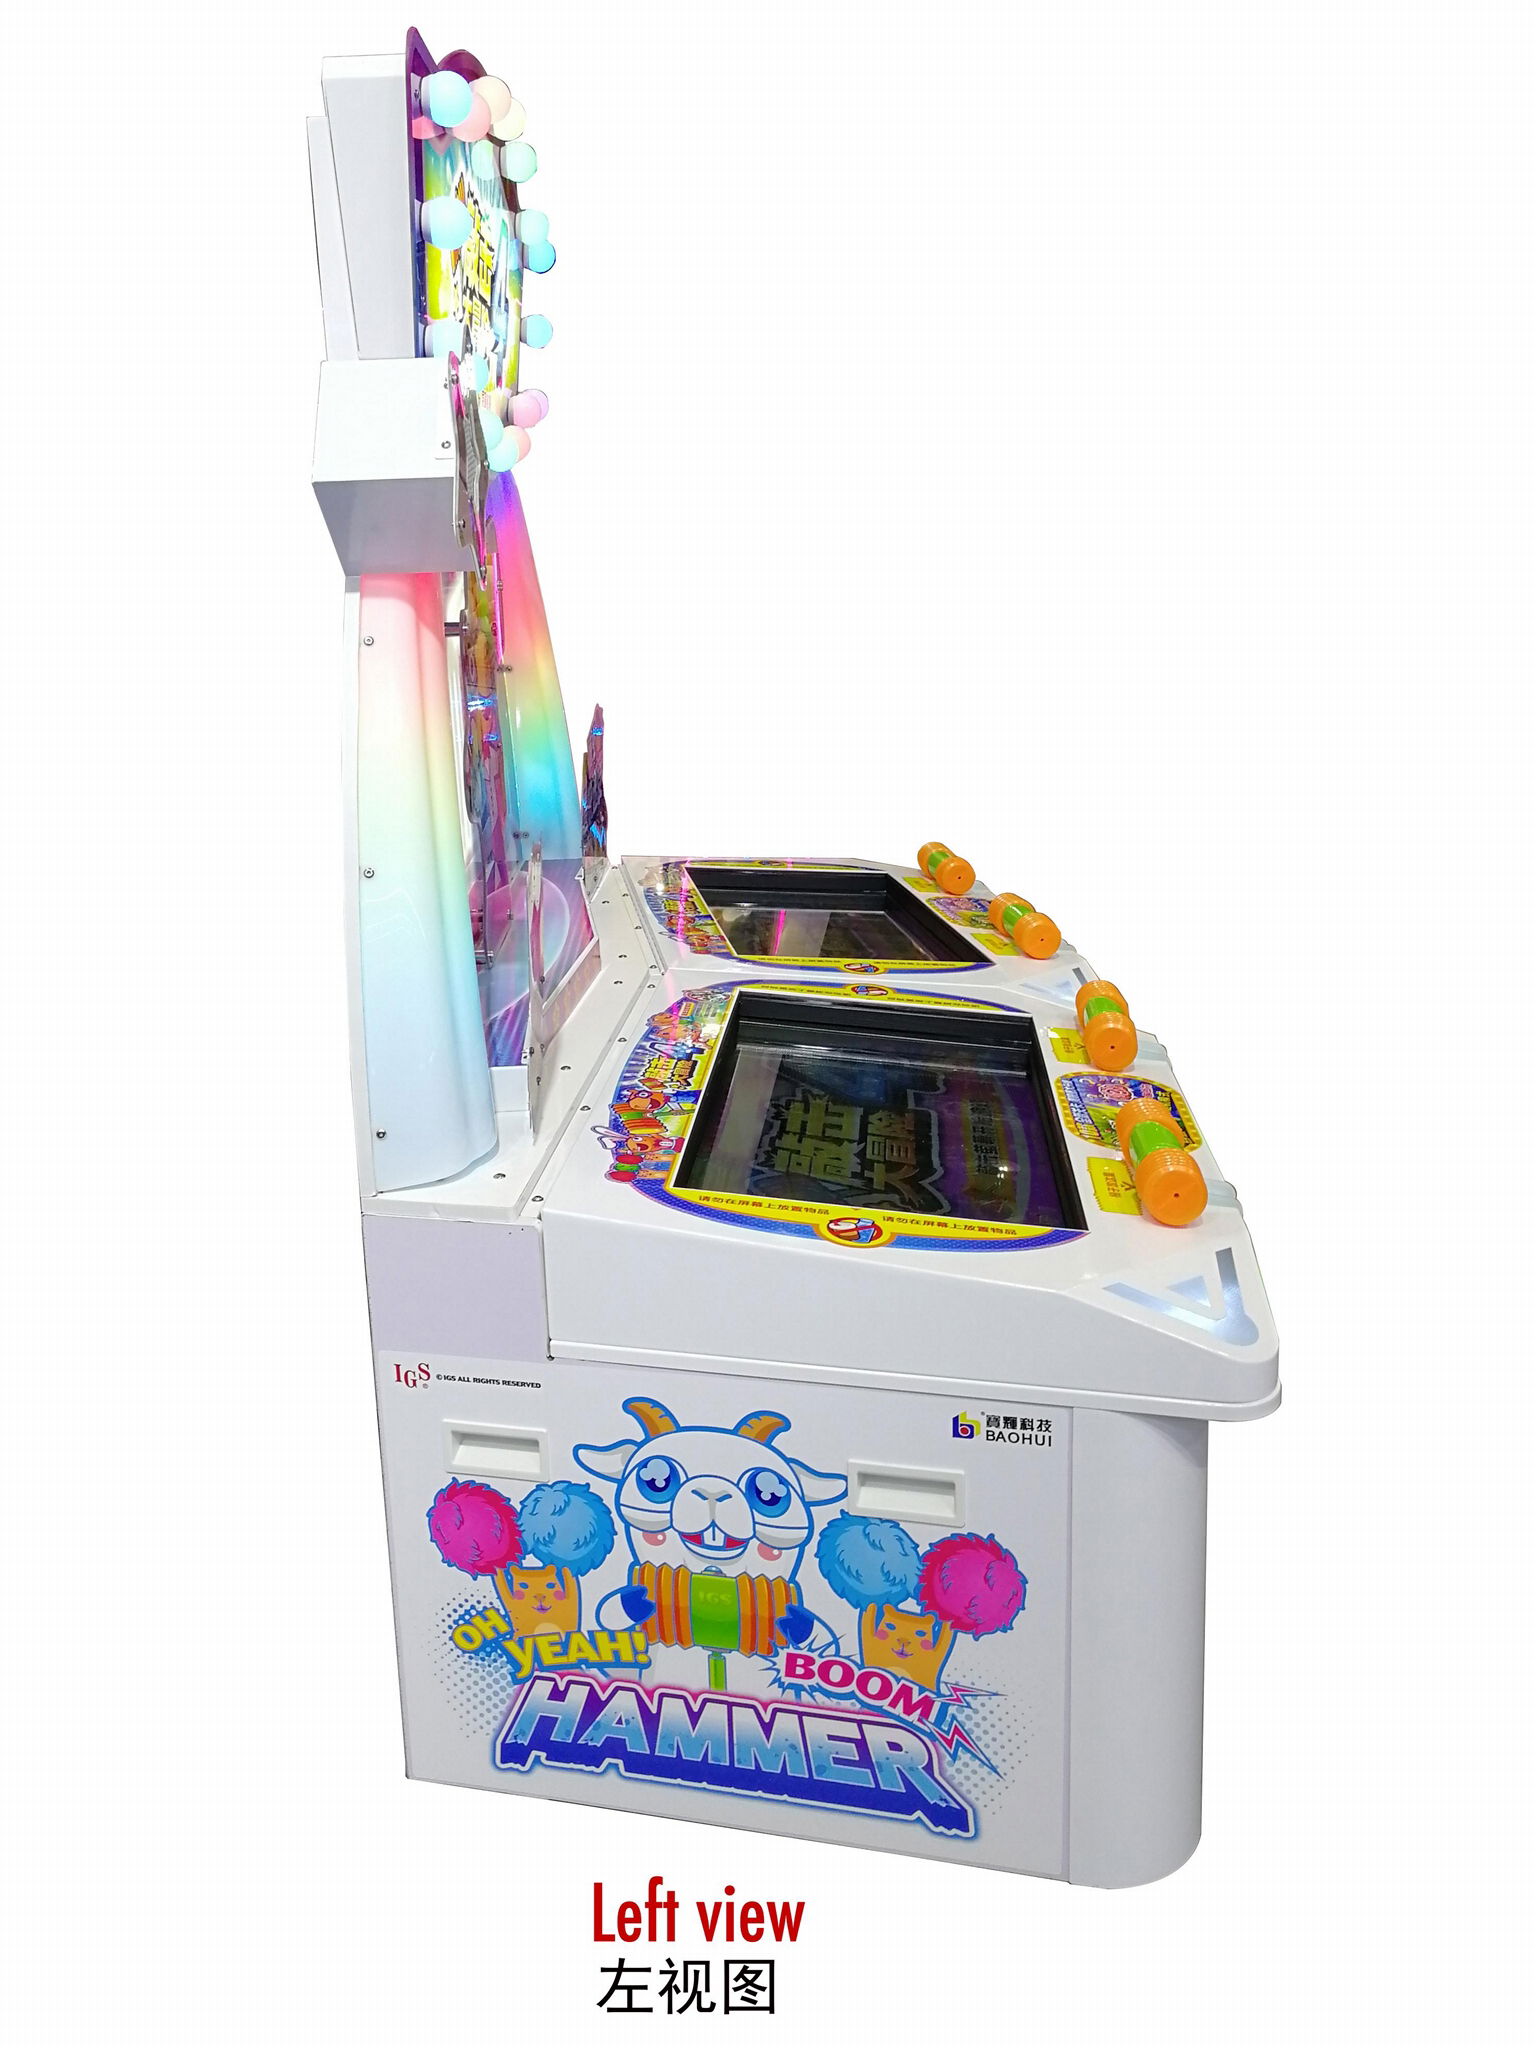 Amazing Hammer 4 Coin Operated Arcade Game Machine Puzzle Game FAG Family Amusem 2